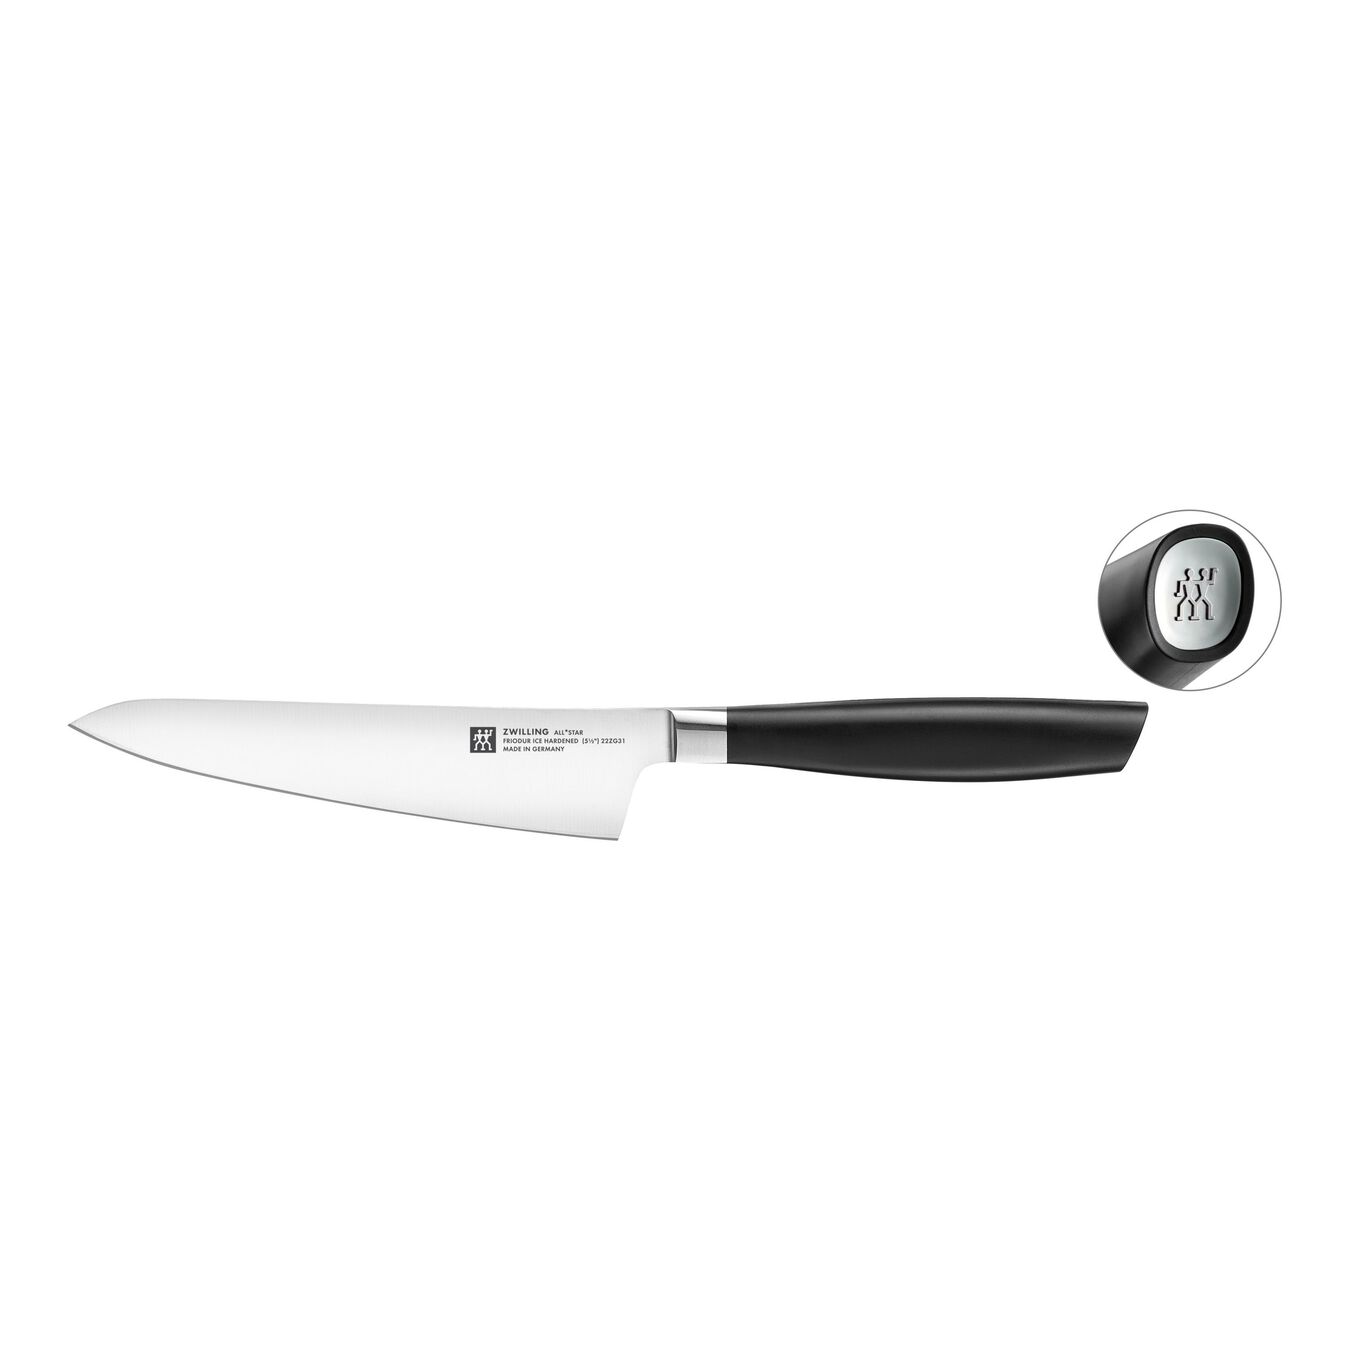 5.5 inch Chef's knife compact, silver,,large 1